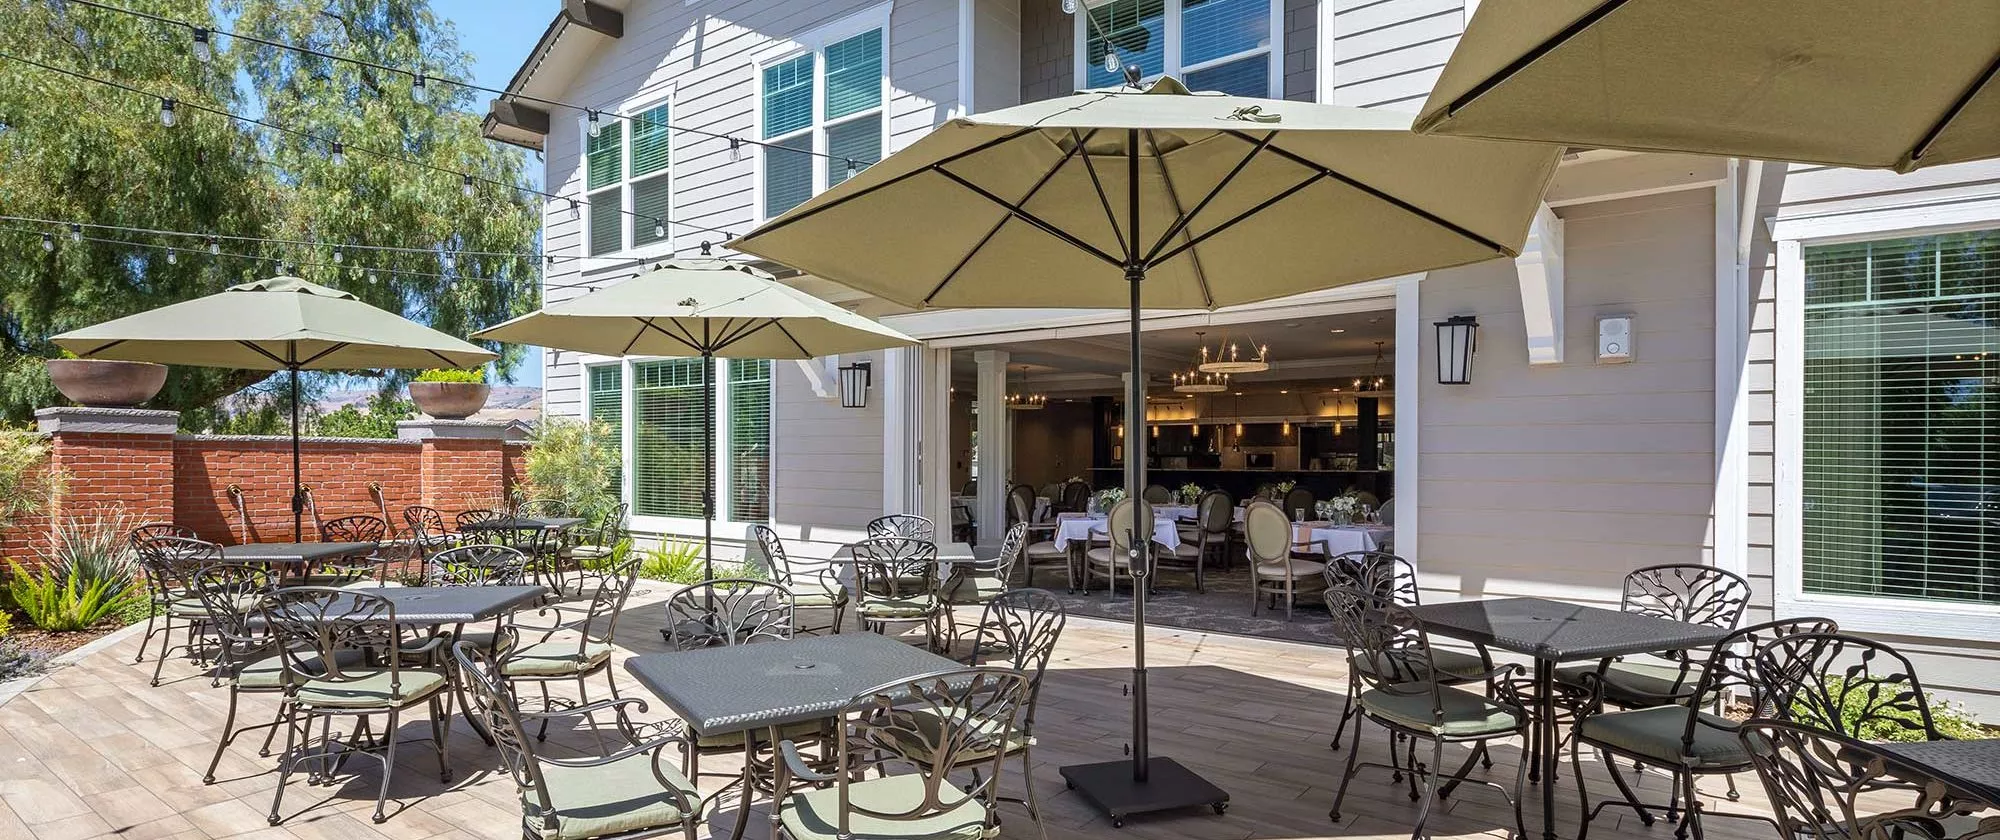 Silver Creek Patio with tables and umbrellas